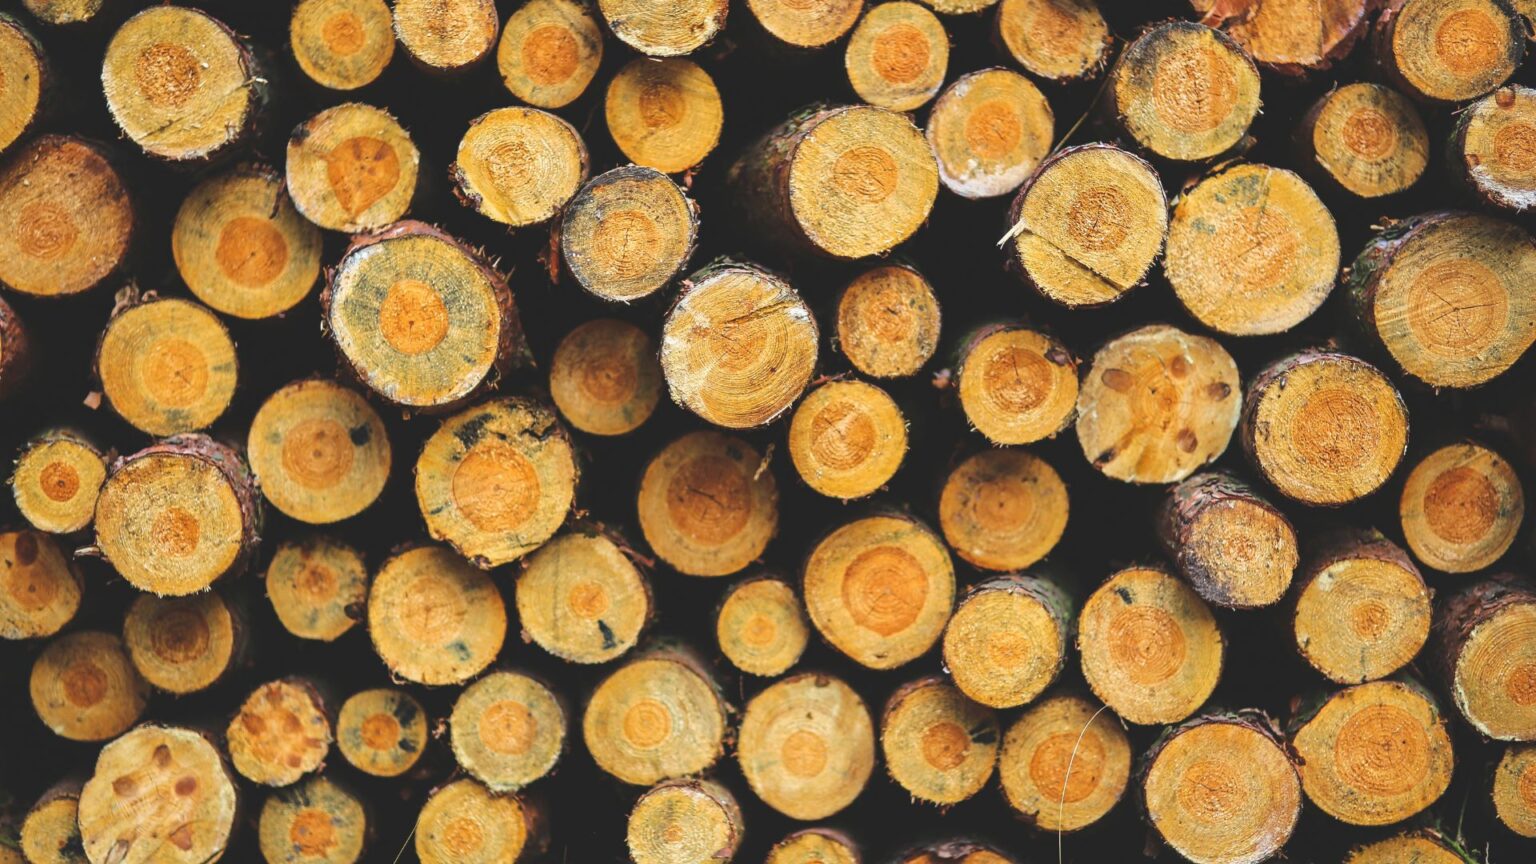 A Look Inside the Lumber Mill: How Wood is Being Processed?